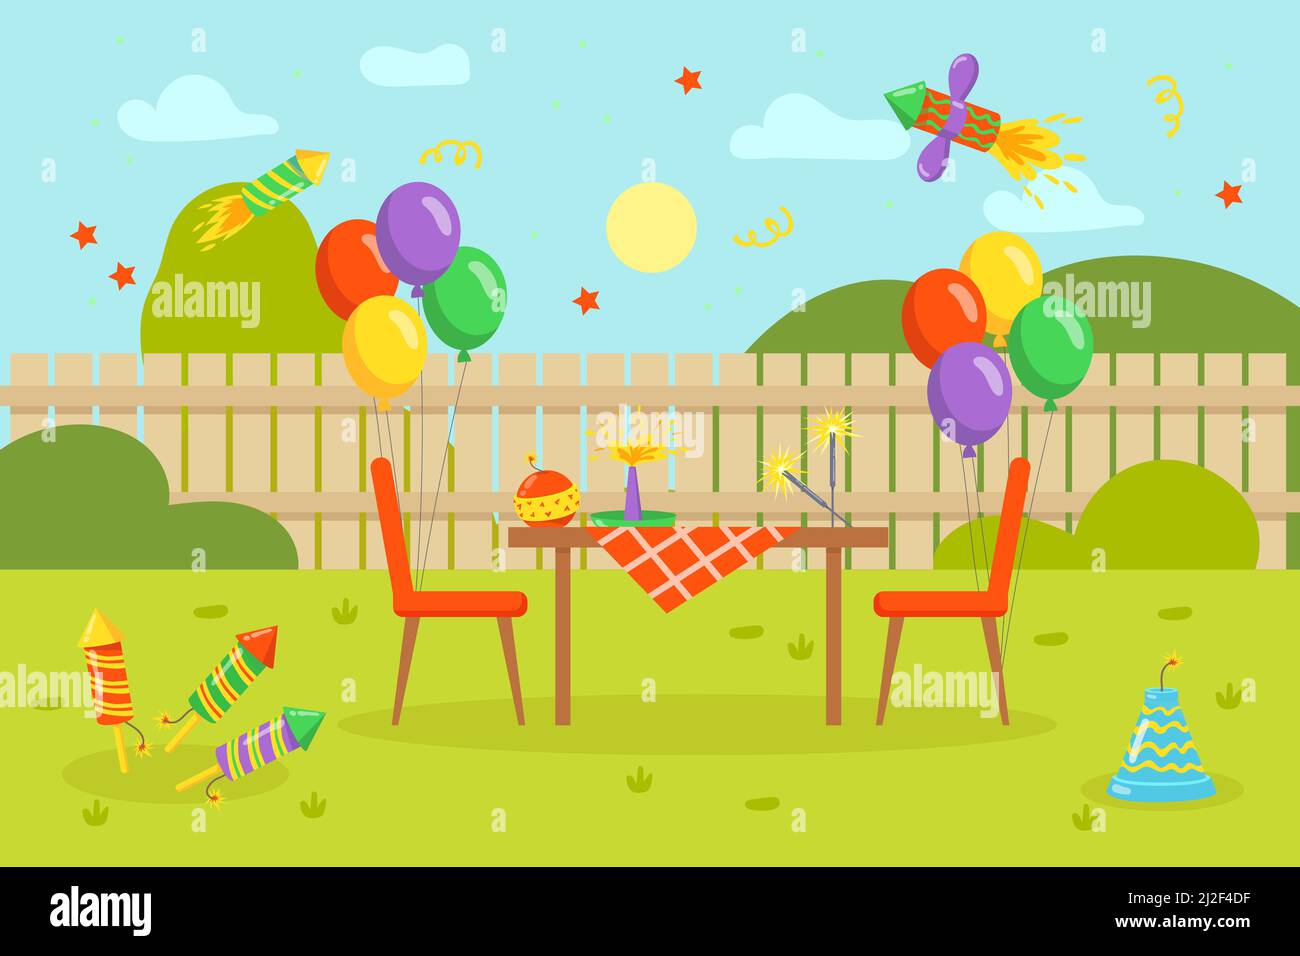 Colorful fireworks and balloons with table in backyard. Firecrackers, confetti, table, chairs, fence in background cartoon vector illustration. Party, Stock Vector